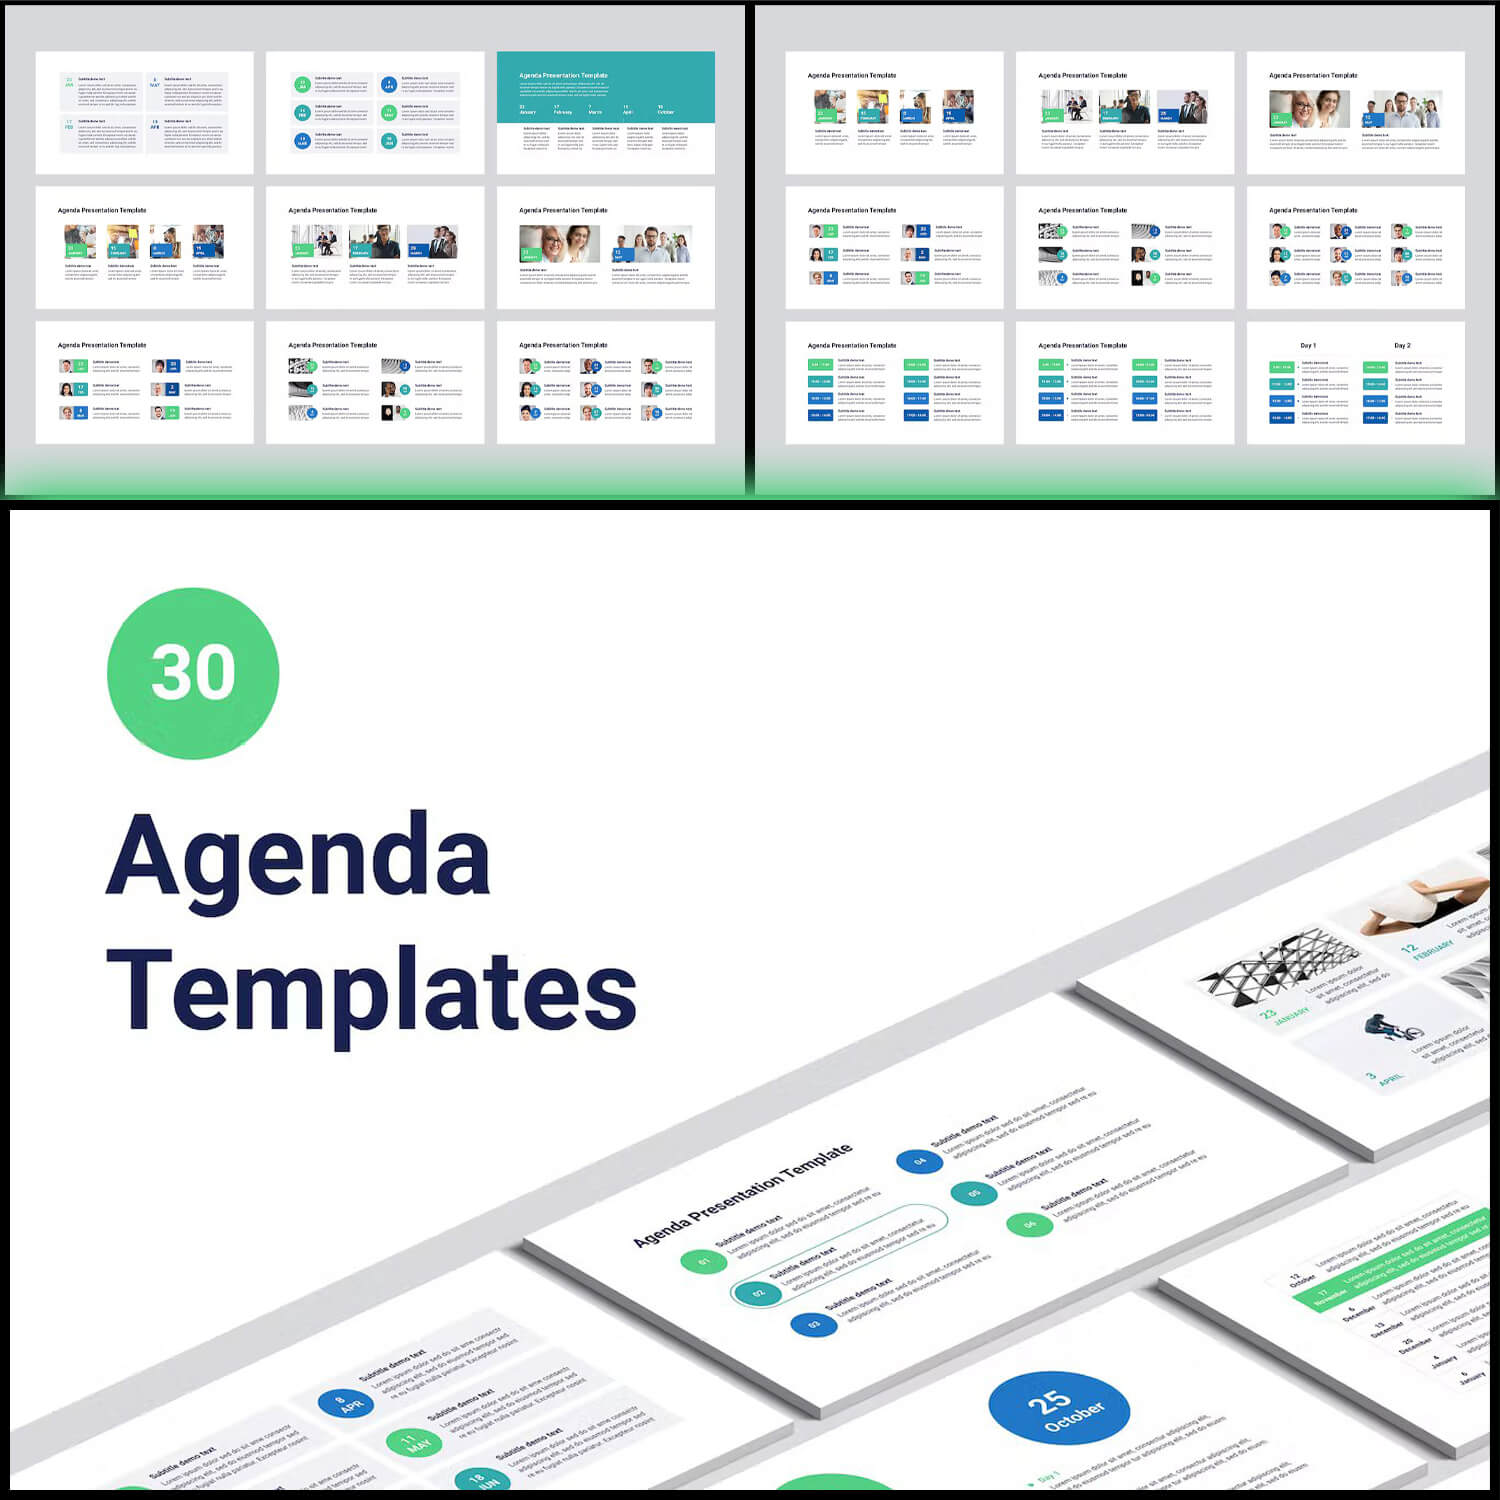 Many slides of Agenda template on the white backgrounds.